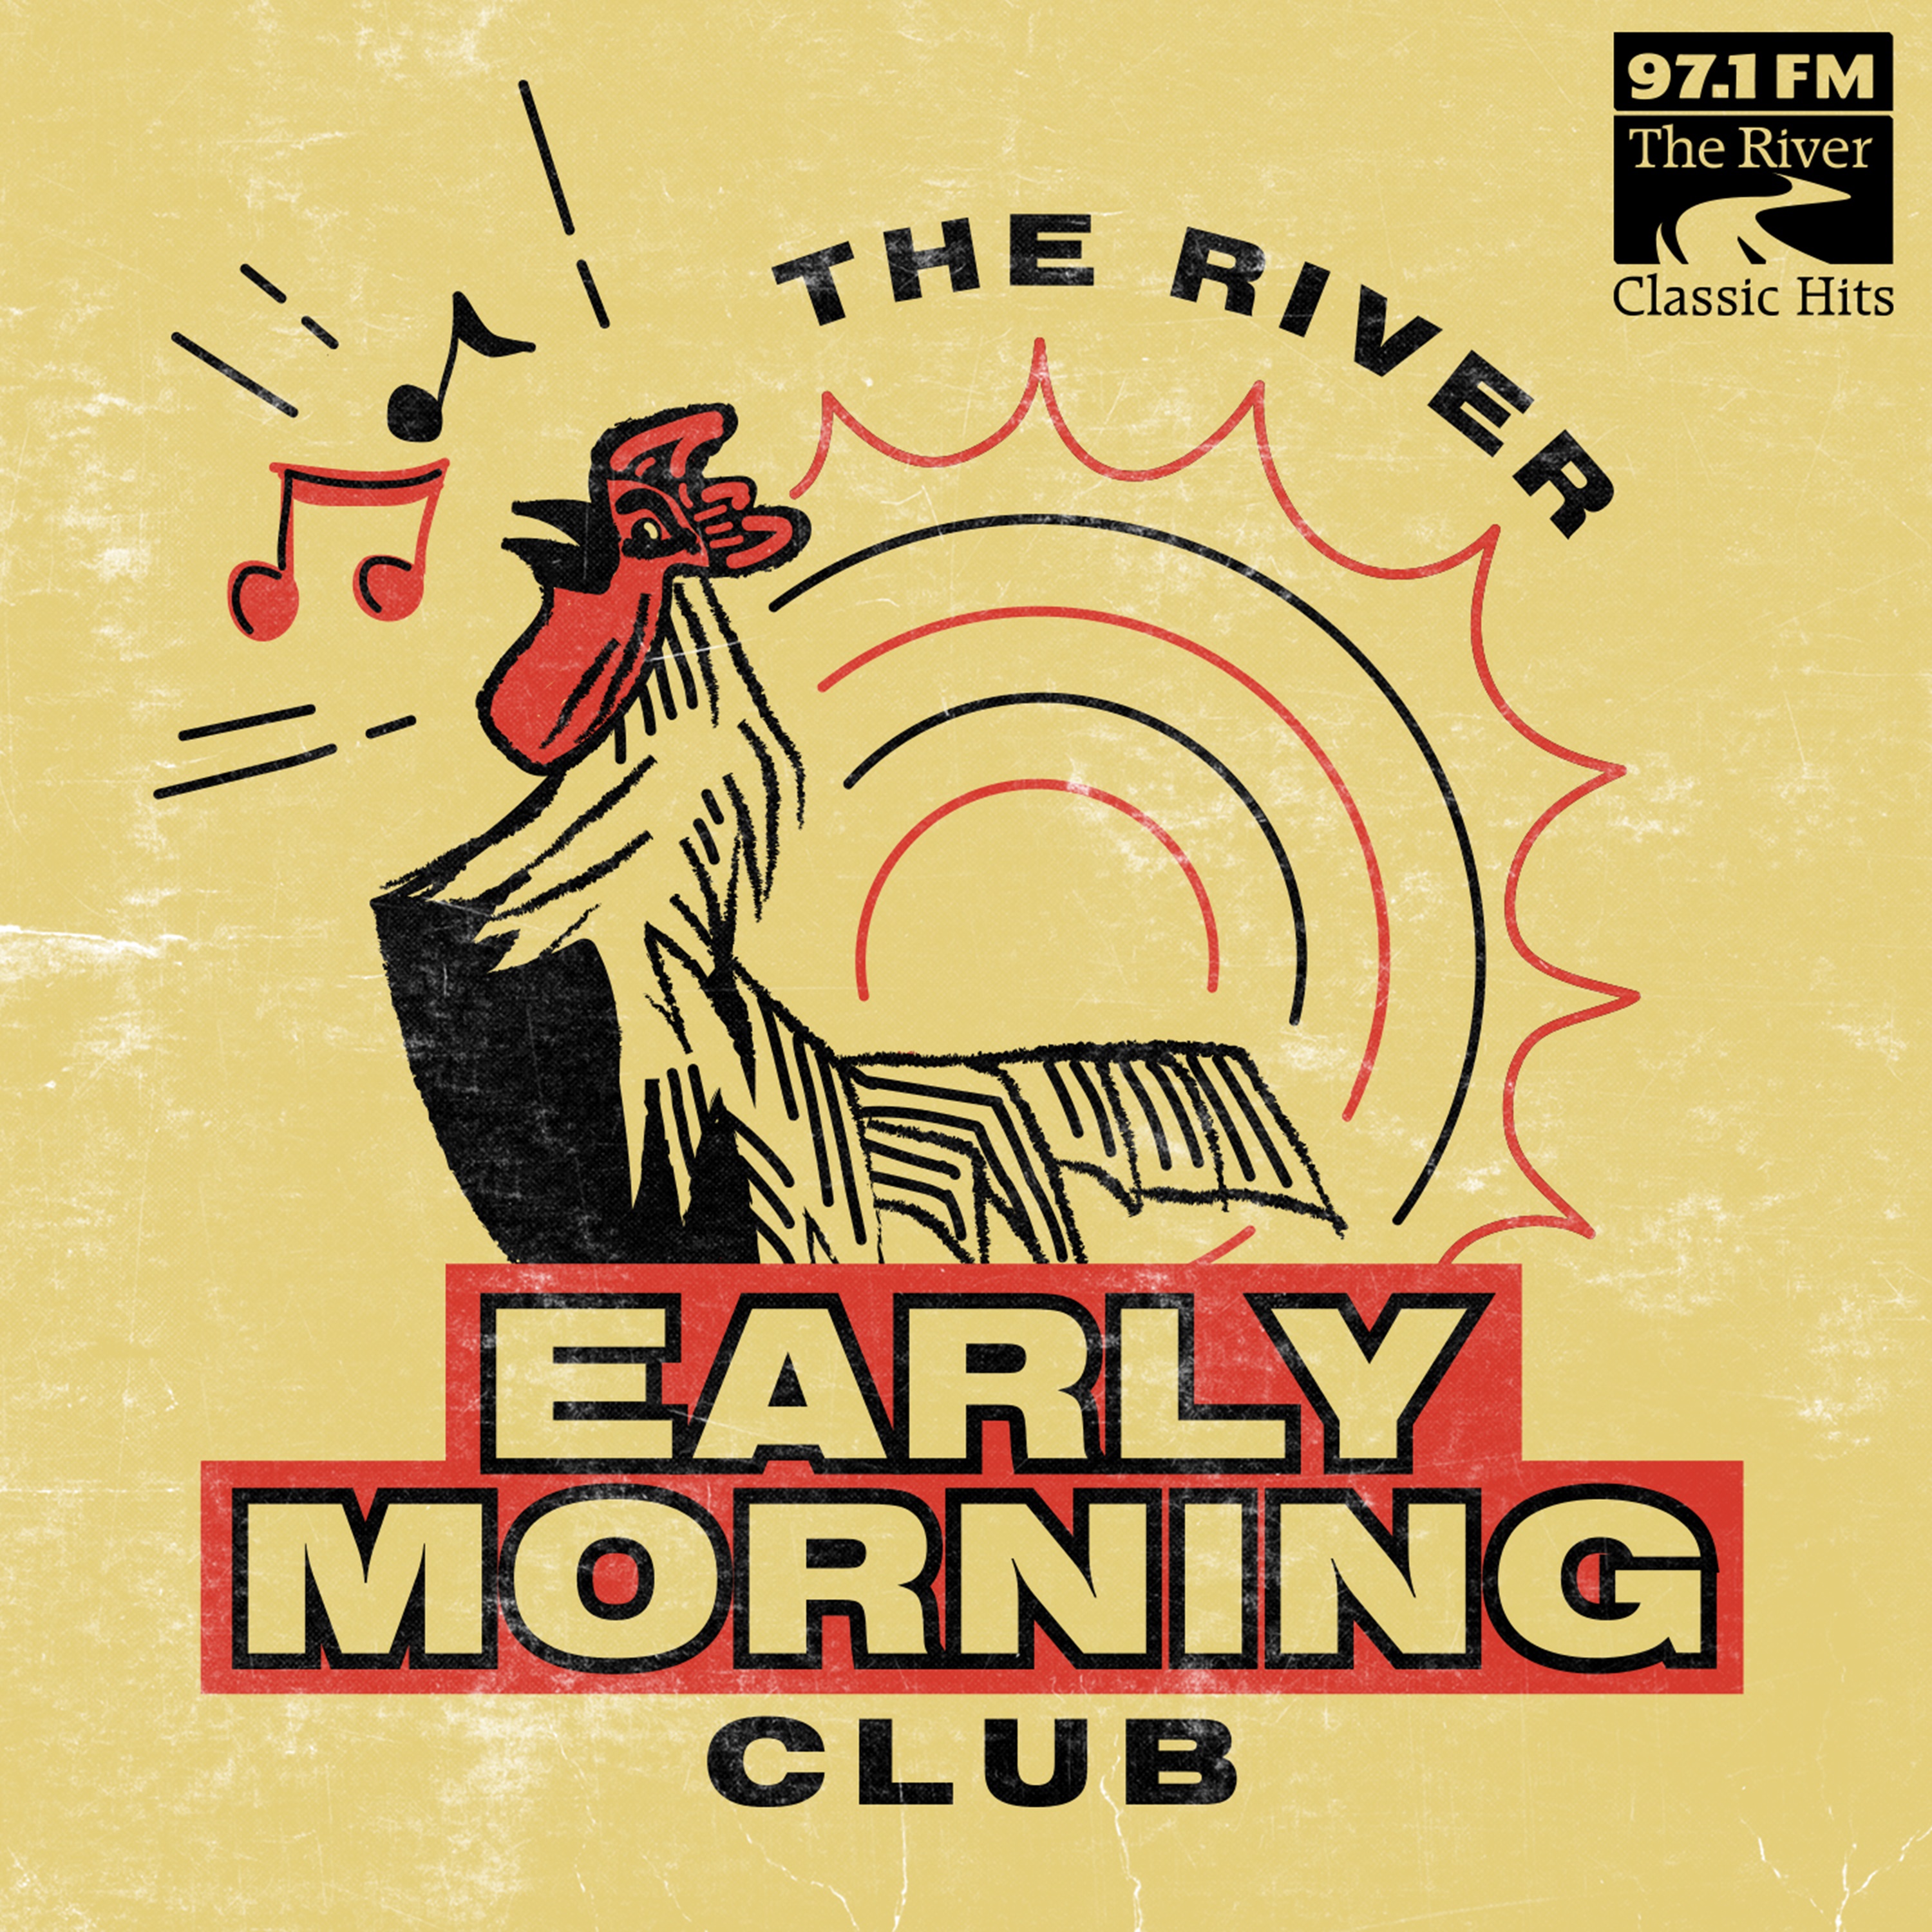 The River Early Morning Club